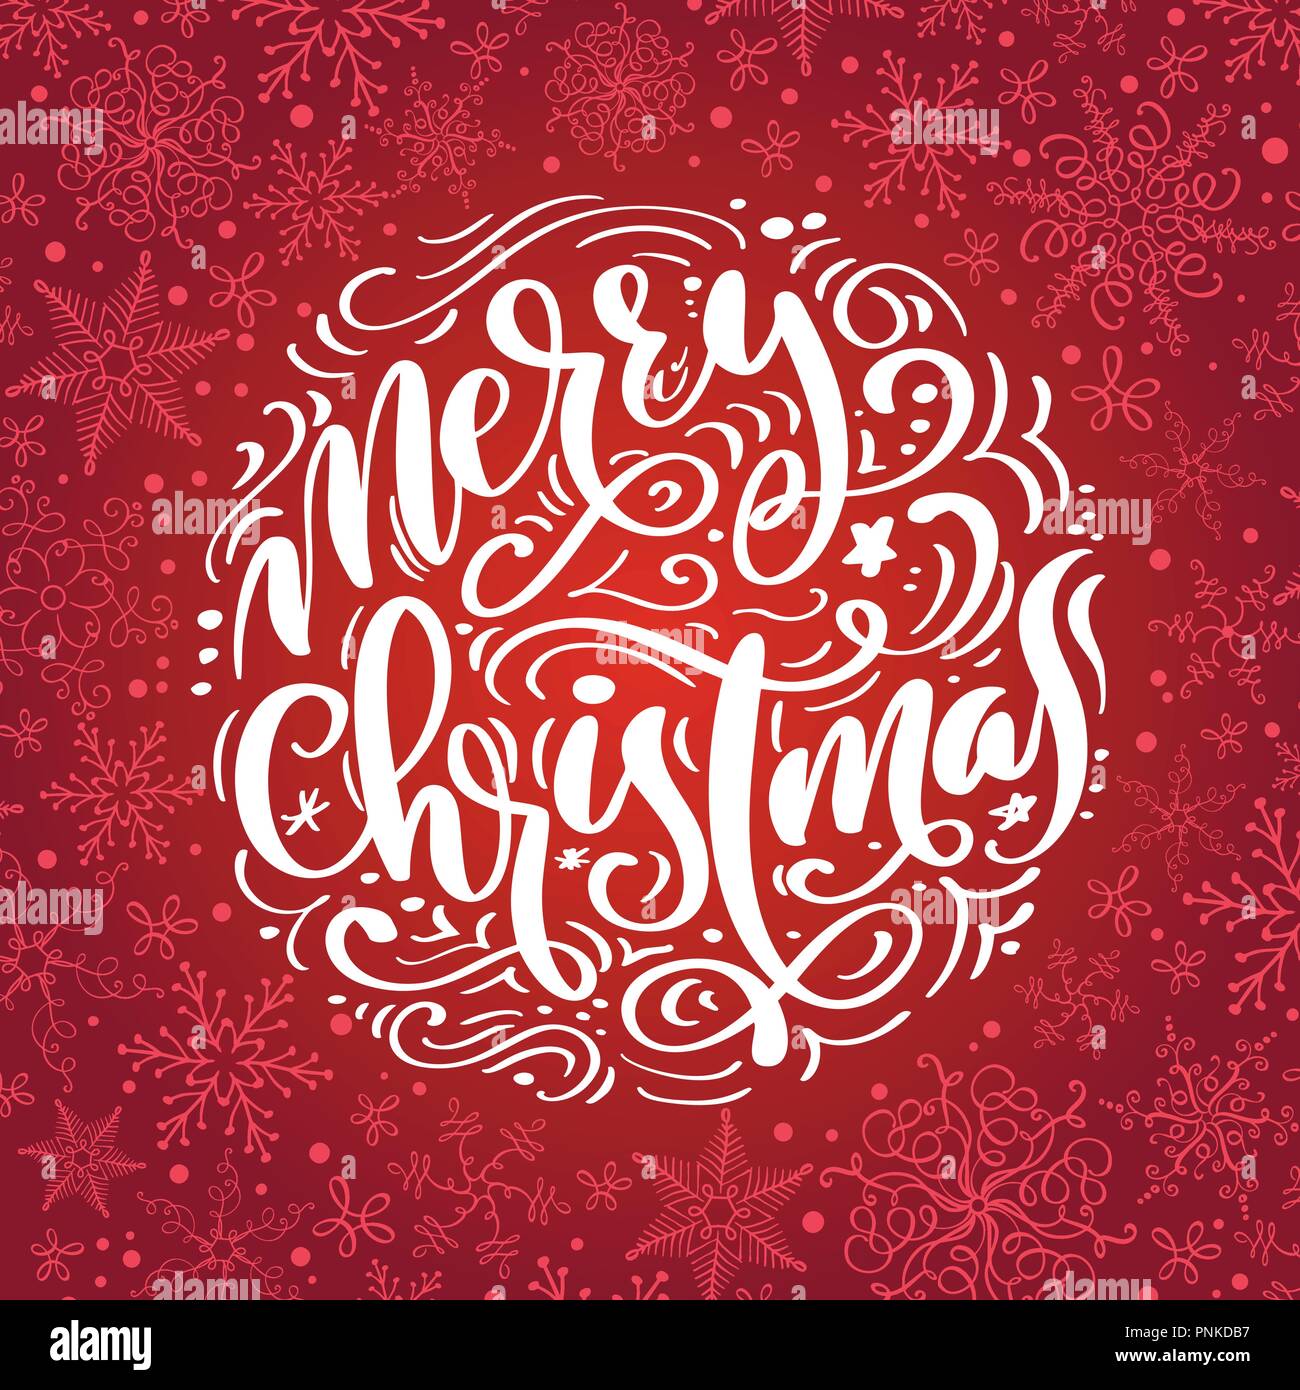 Merry Christmas Calligraphy Vector Text Lettering Design On Red Background Creative Typography 